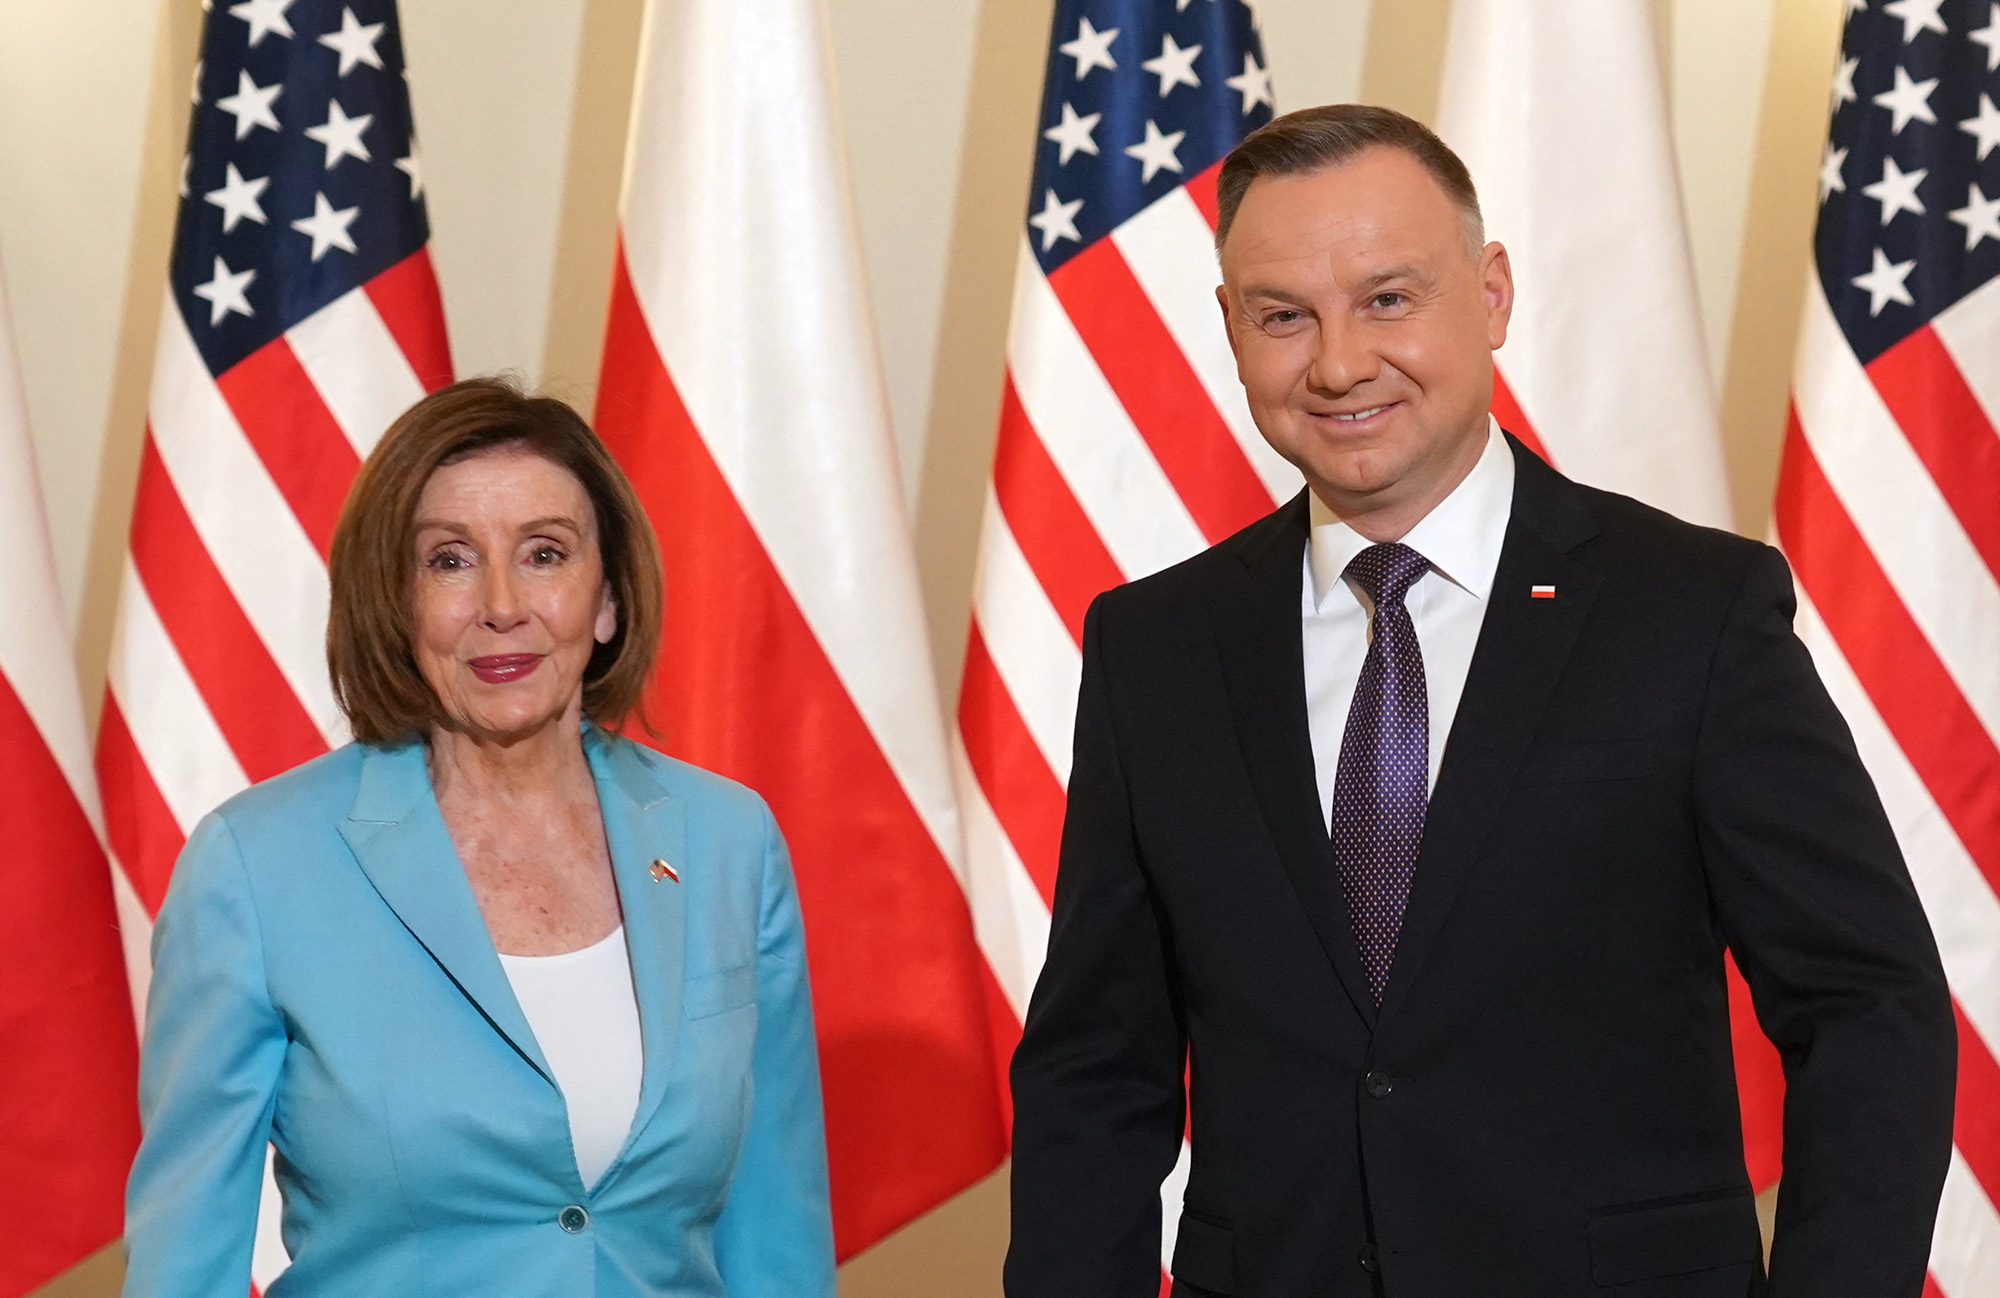 US Speaker of the House Nancy Pelosi stands next to Polish President Andrzej Duda as they meet in Warsaw, Poland, on May 2.